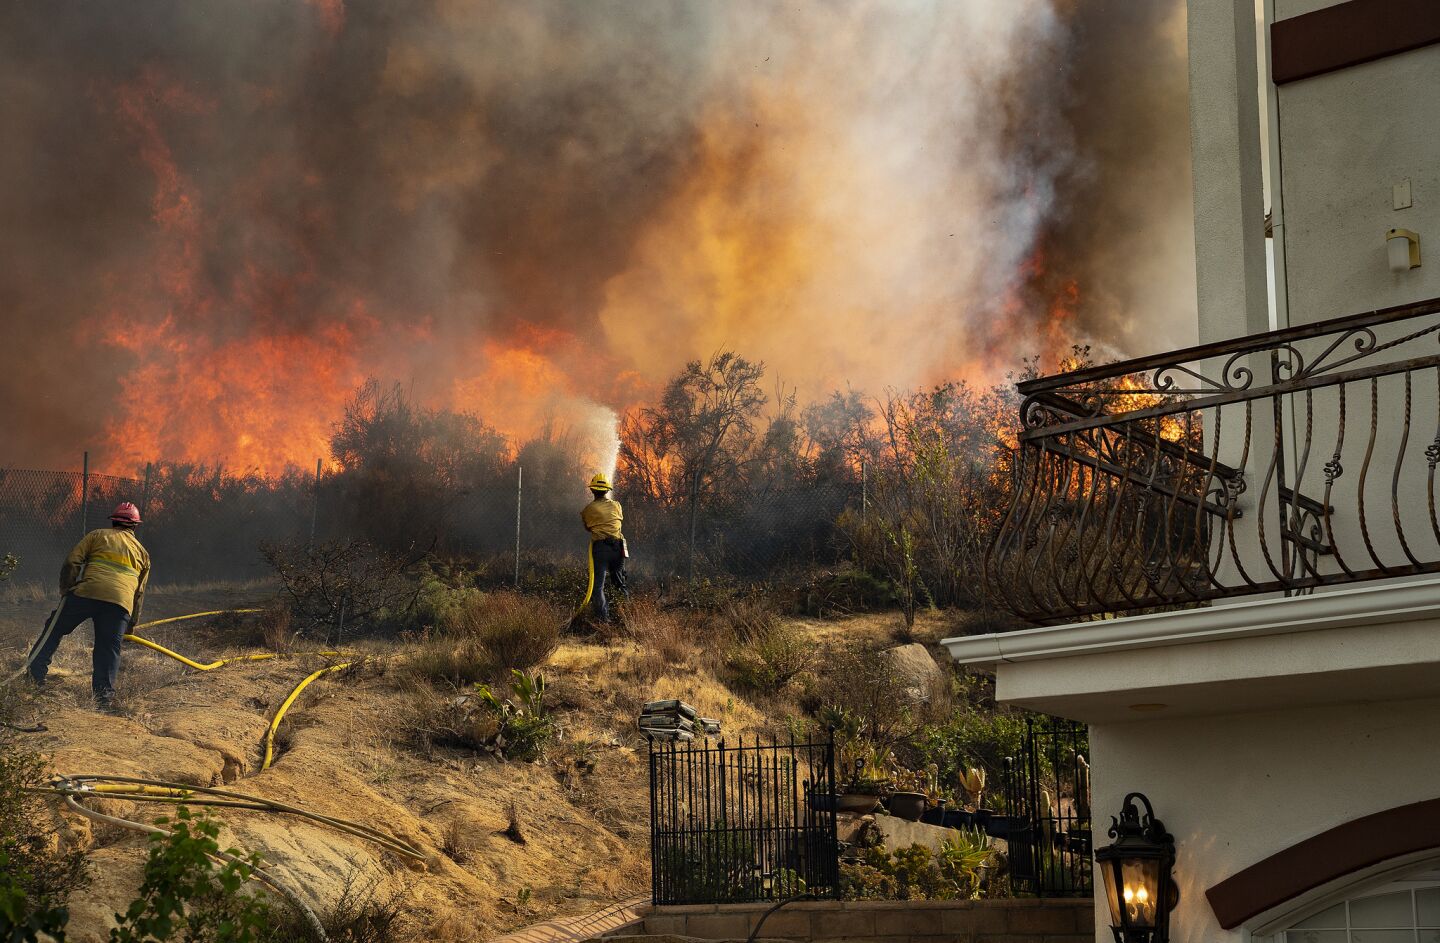 Firefighters battle to save a home from a wall off flames as the Holy fire continues to burn out of control in Lake Elsinore, Calif.